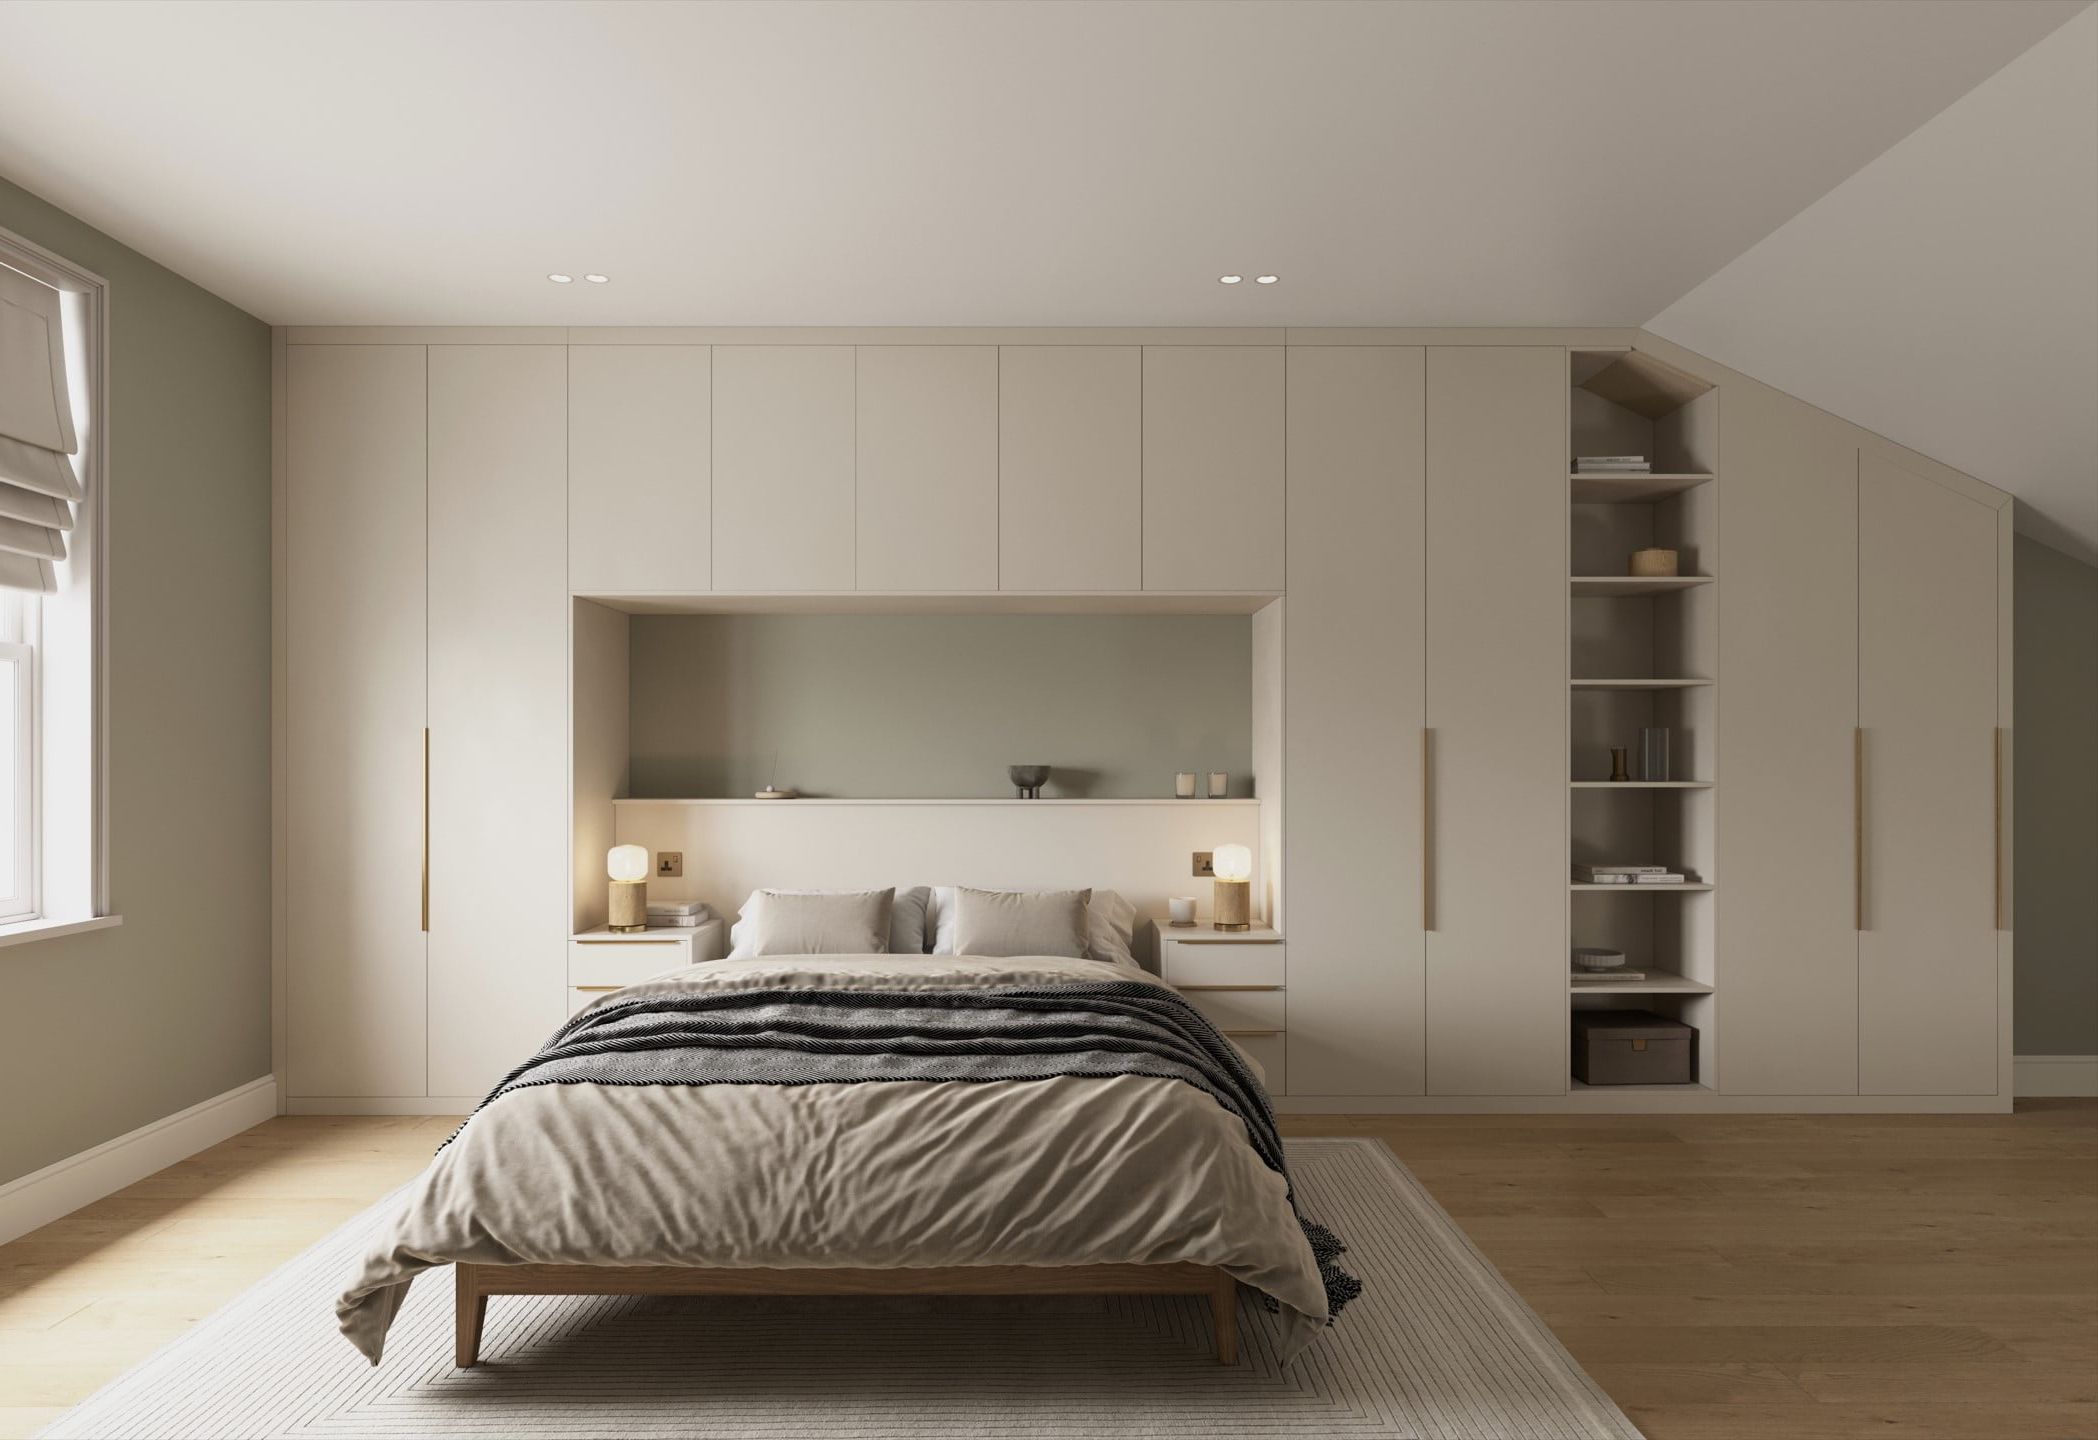 Overbed Fitted Wardrobes And Storage Units, Bespoke Overhead Storage Inside Bedroom Wardrobes Storages (Gallery 3 of 20)